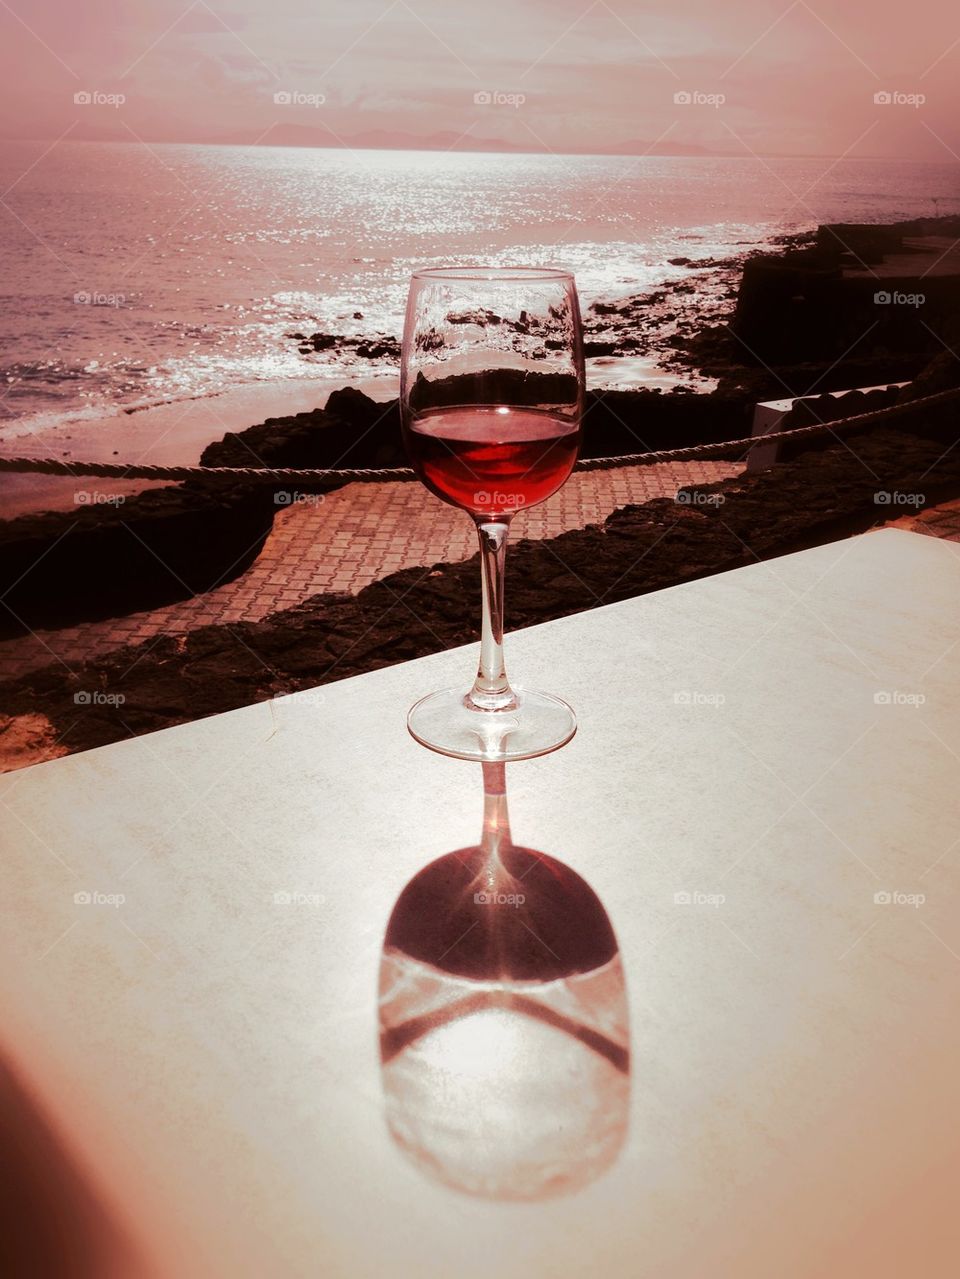 Reflection of red wine glass on table near the beach